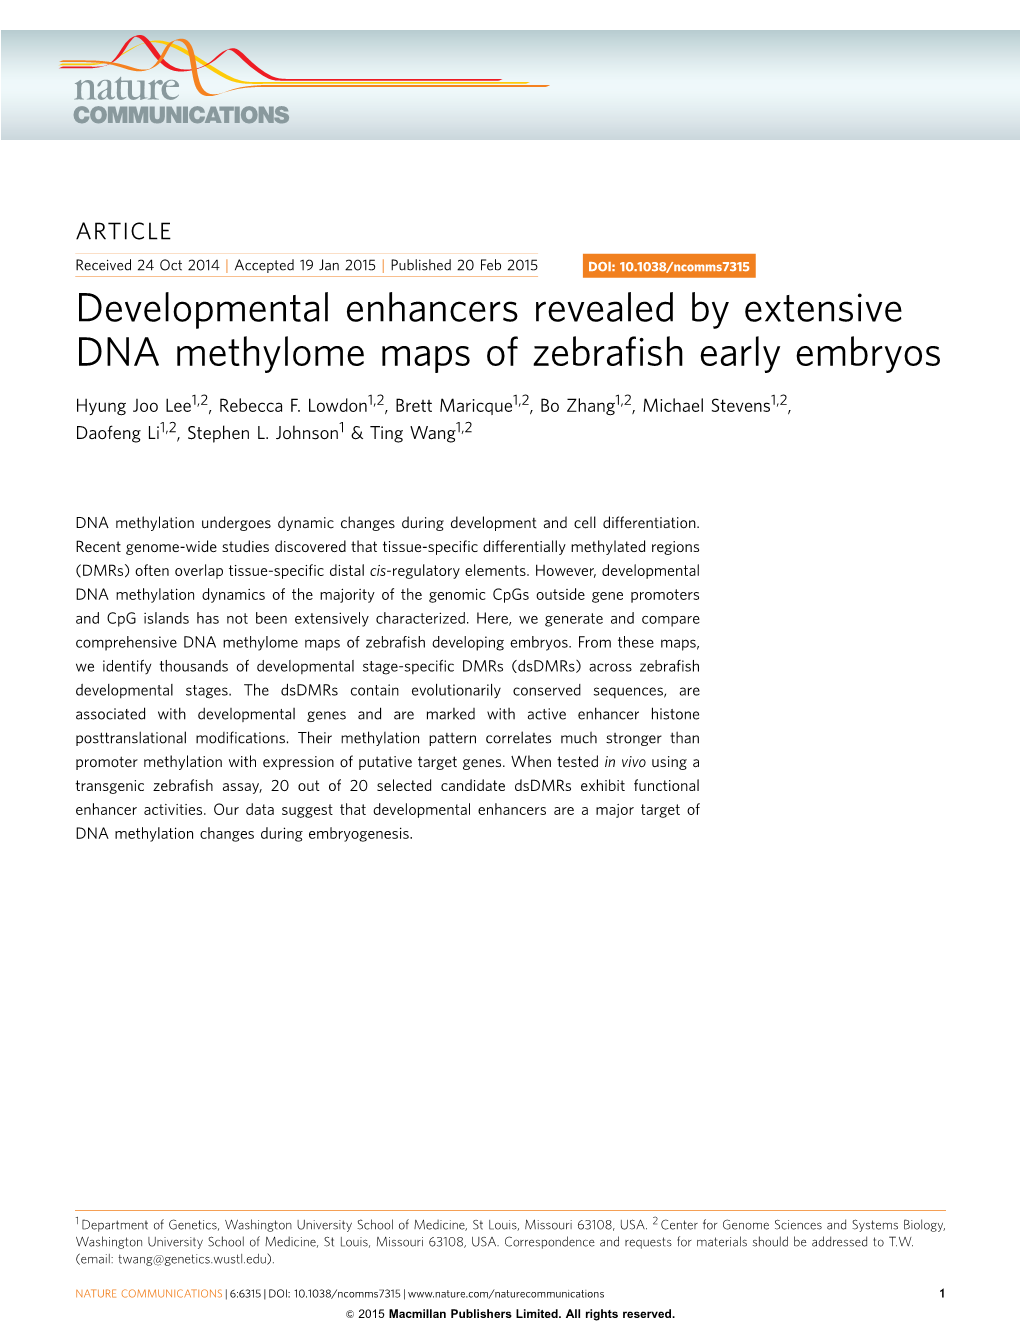 Developmental Enhancers Revealed by Extensive DNA Methylome Maps of Zebrafish Early Embryos